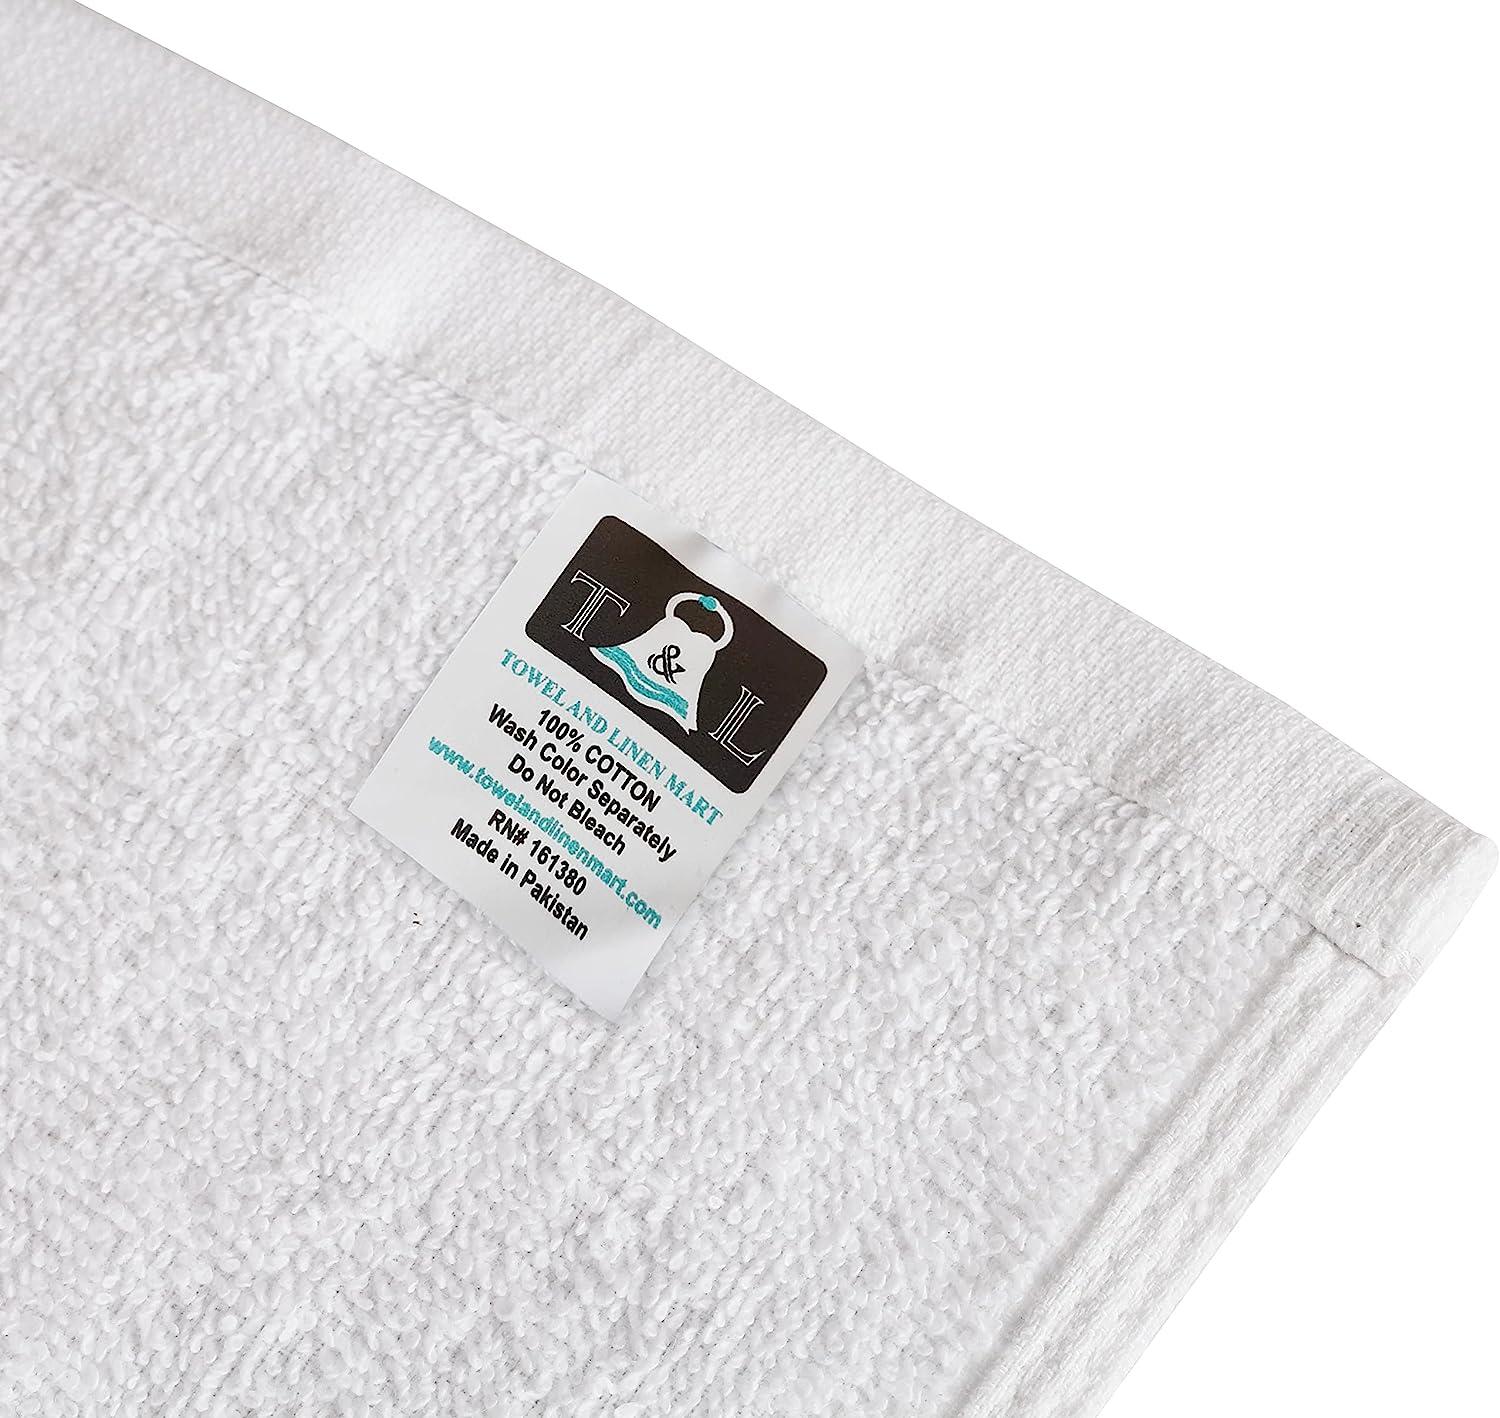 Towel and Linen Mart White Salon Towels, Pack of 12 (Not Bleach